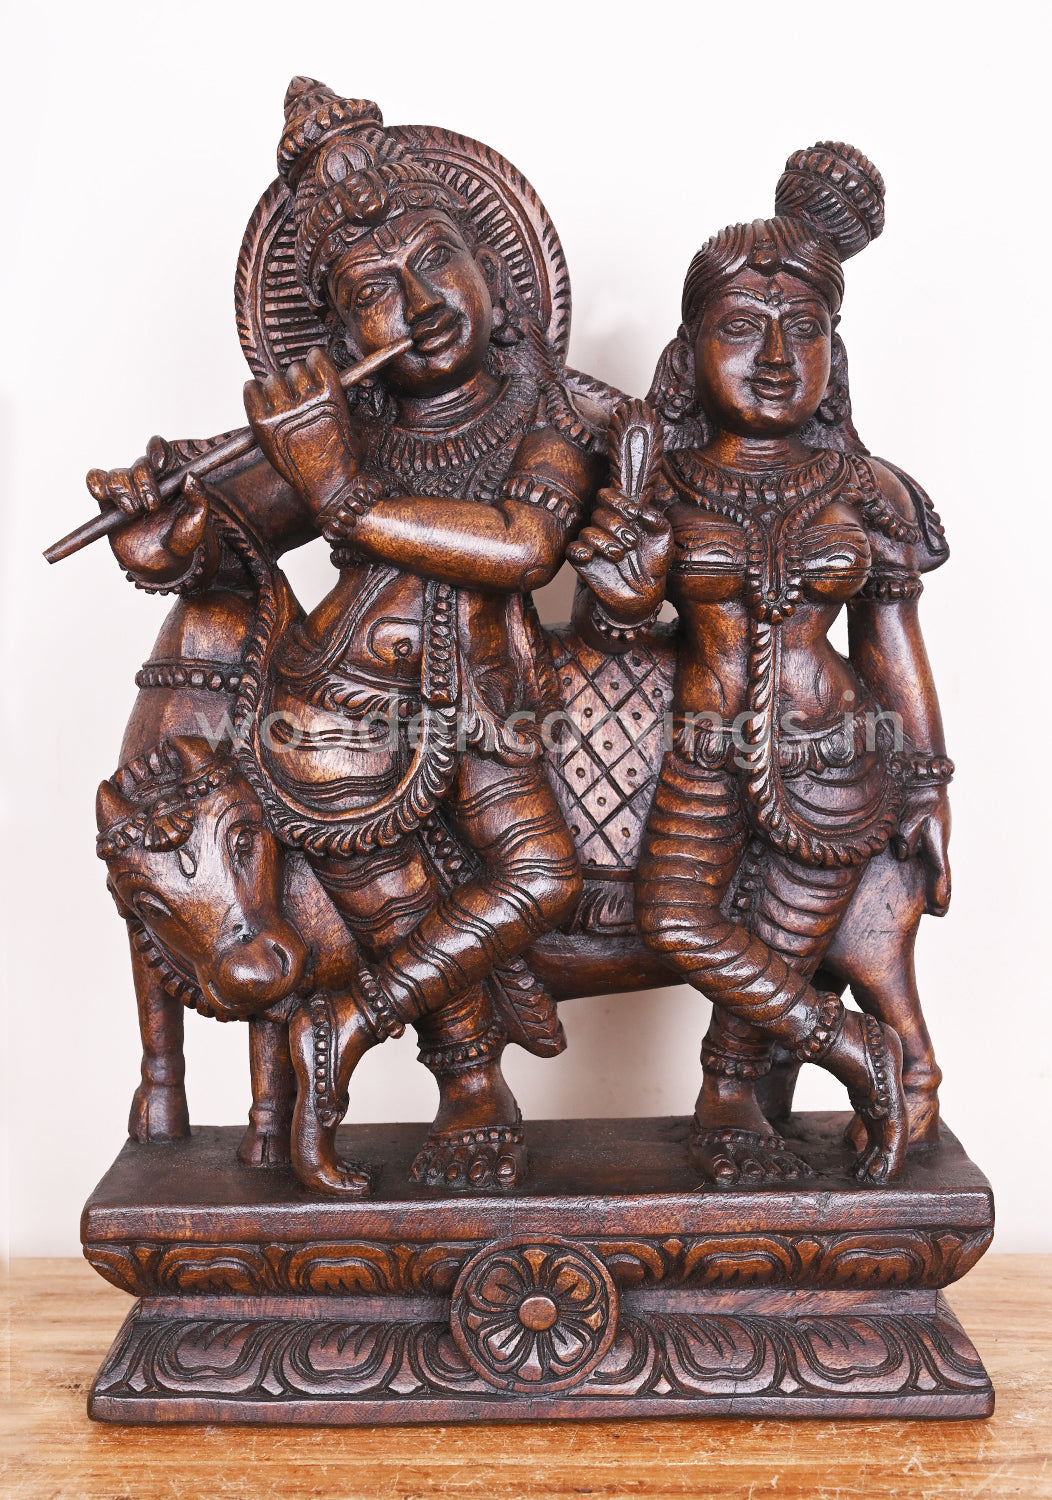 Showpiece Sculpture of Lord Krishna and His Consort Radha Standing With Cow and Playing Flute Deity 18"